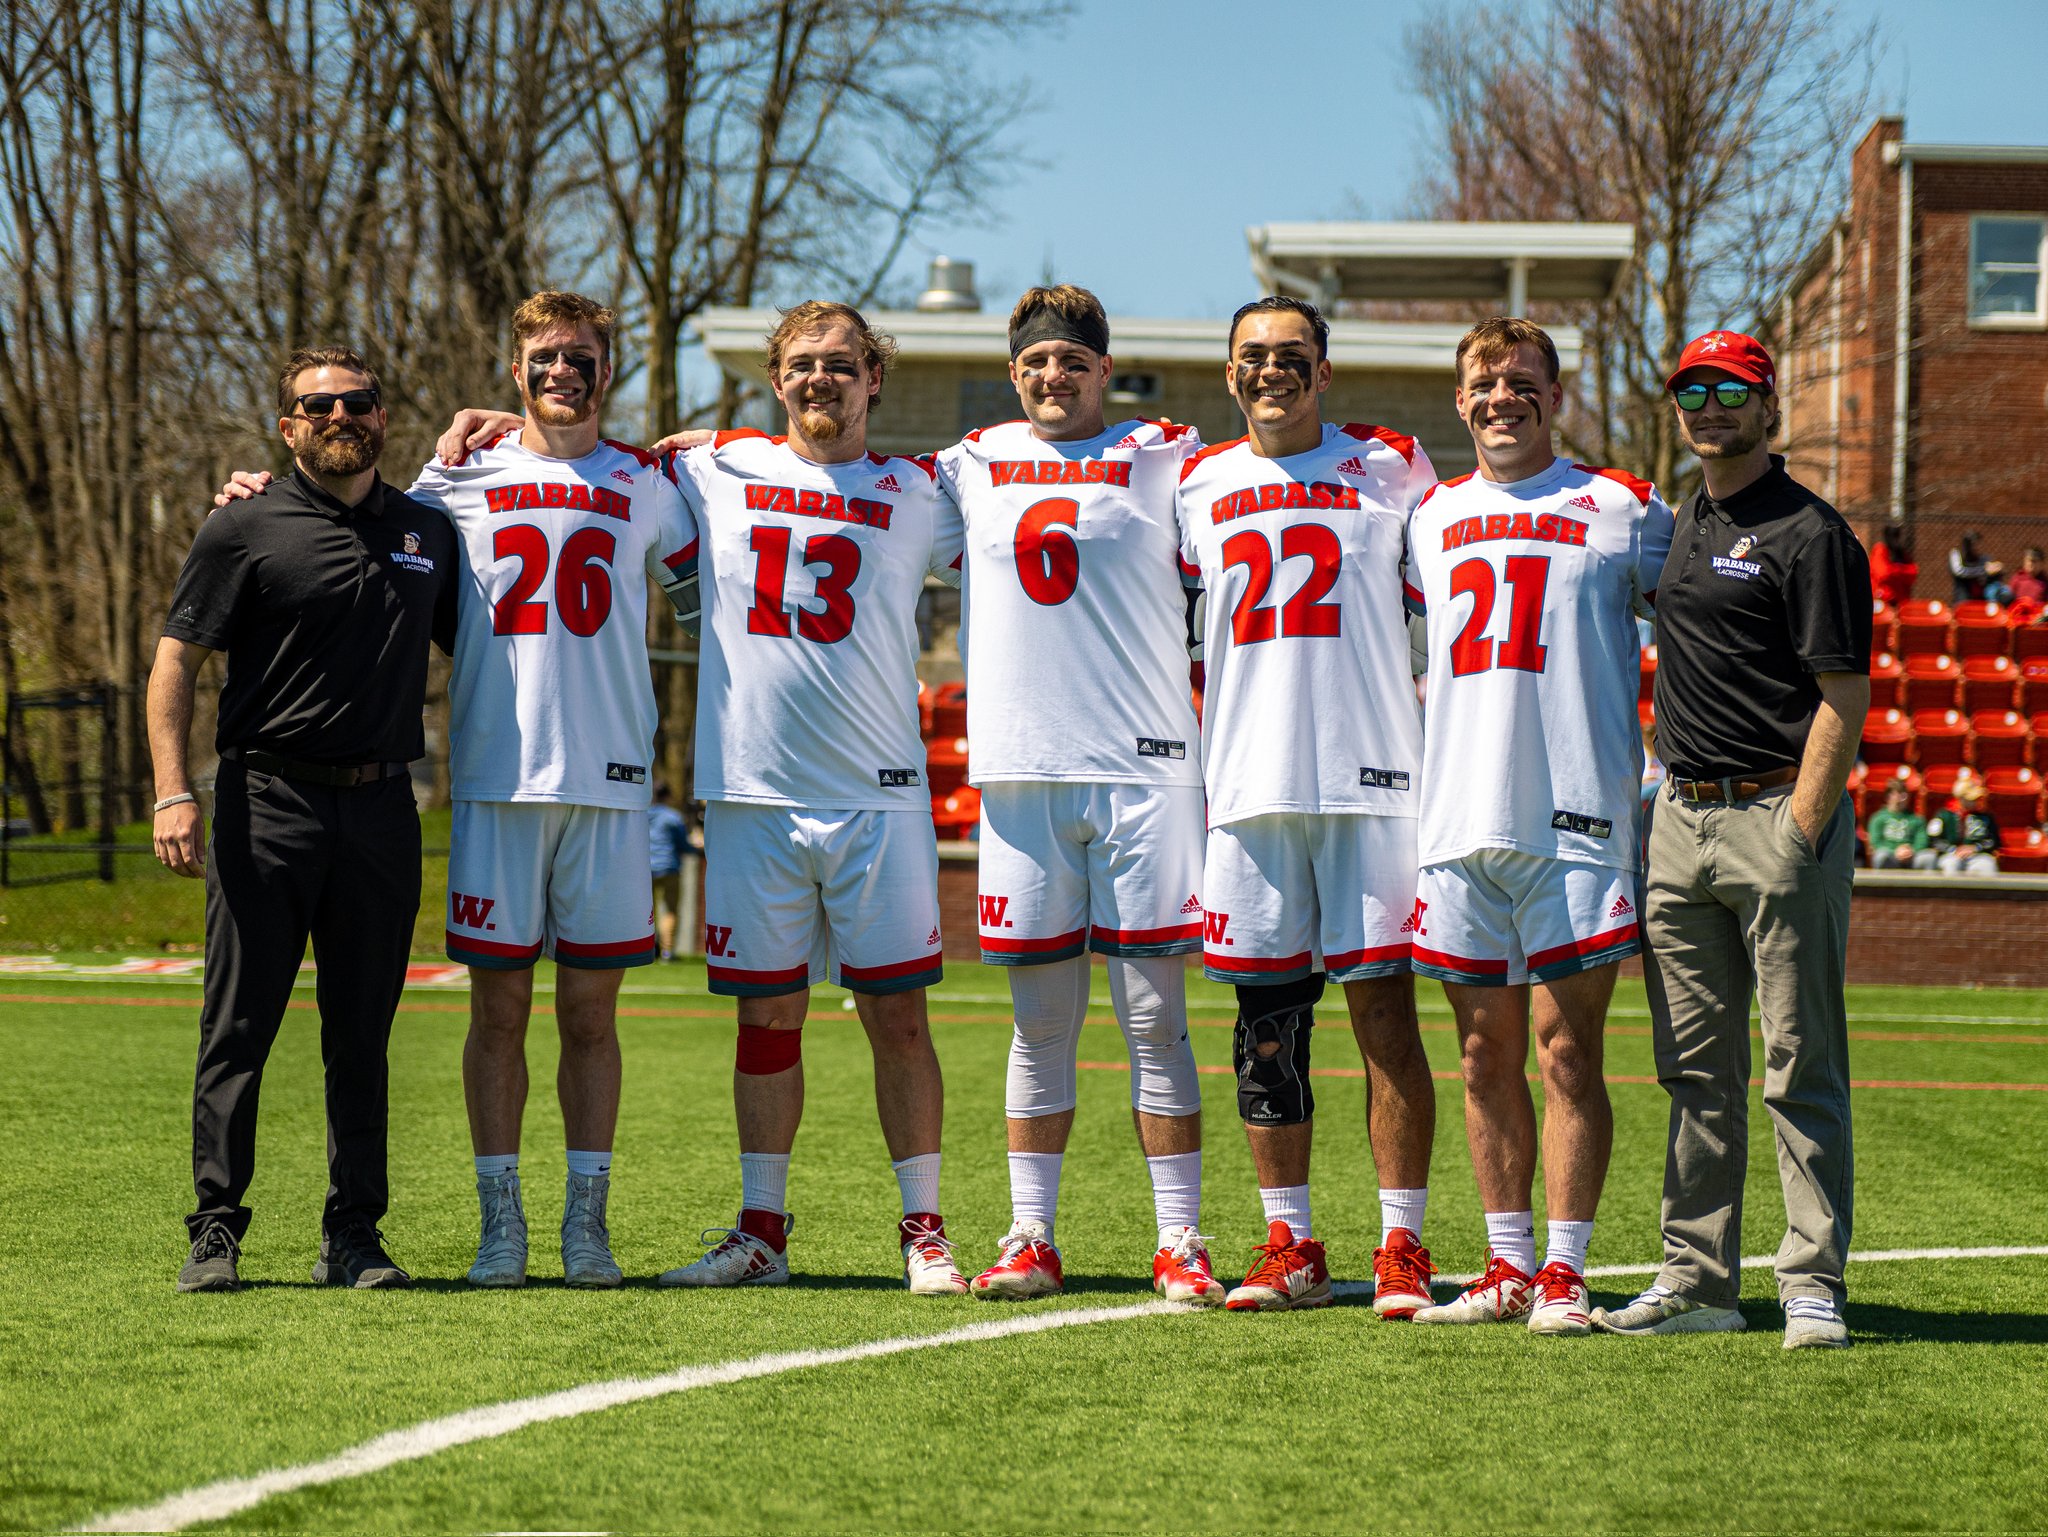 Eaton (third from right) joins Head Lacrosse Coach Chris Burke, Assistant Lacrosse Coach Justin Dionne and other senior student-athletes for a photo before a home game versus Wooster. Eaton has played as a midfielder on the team for the last four years.